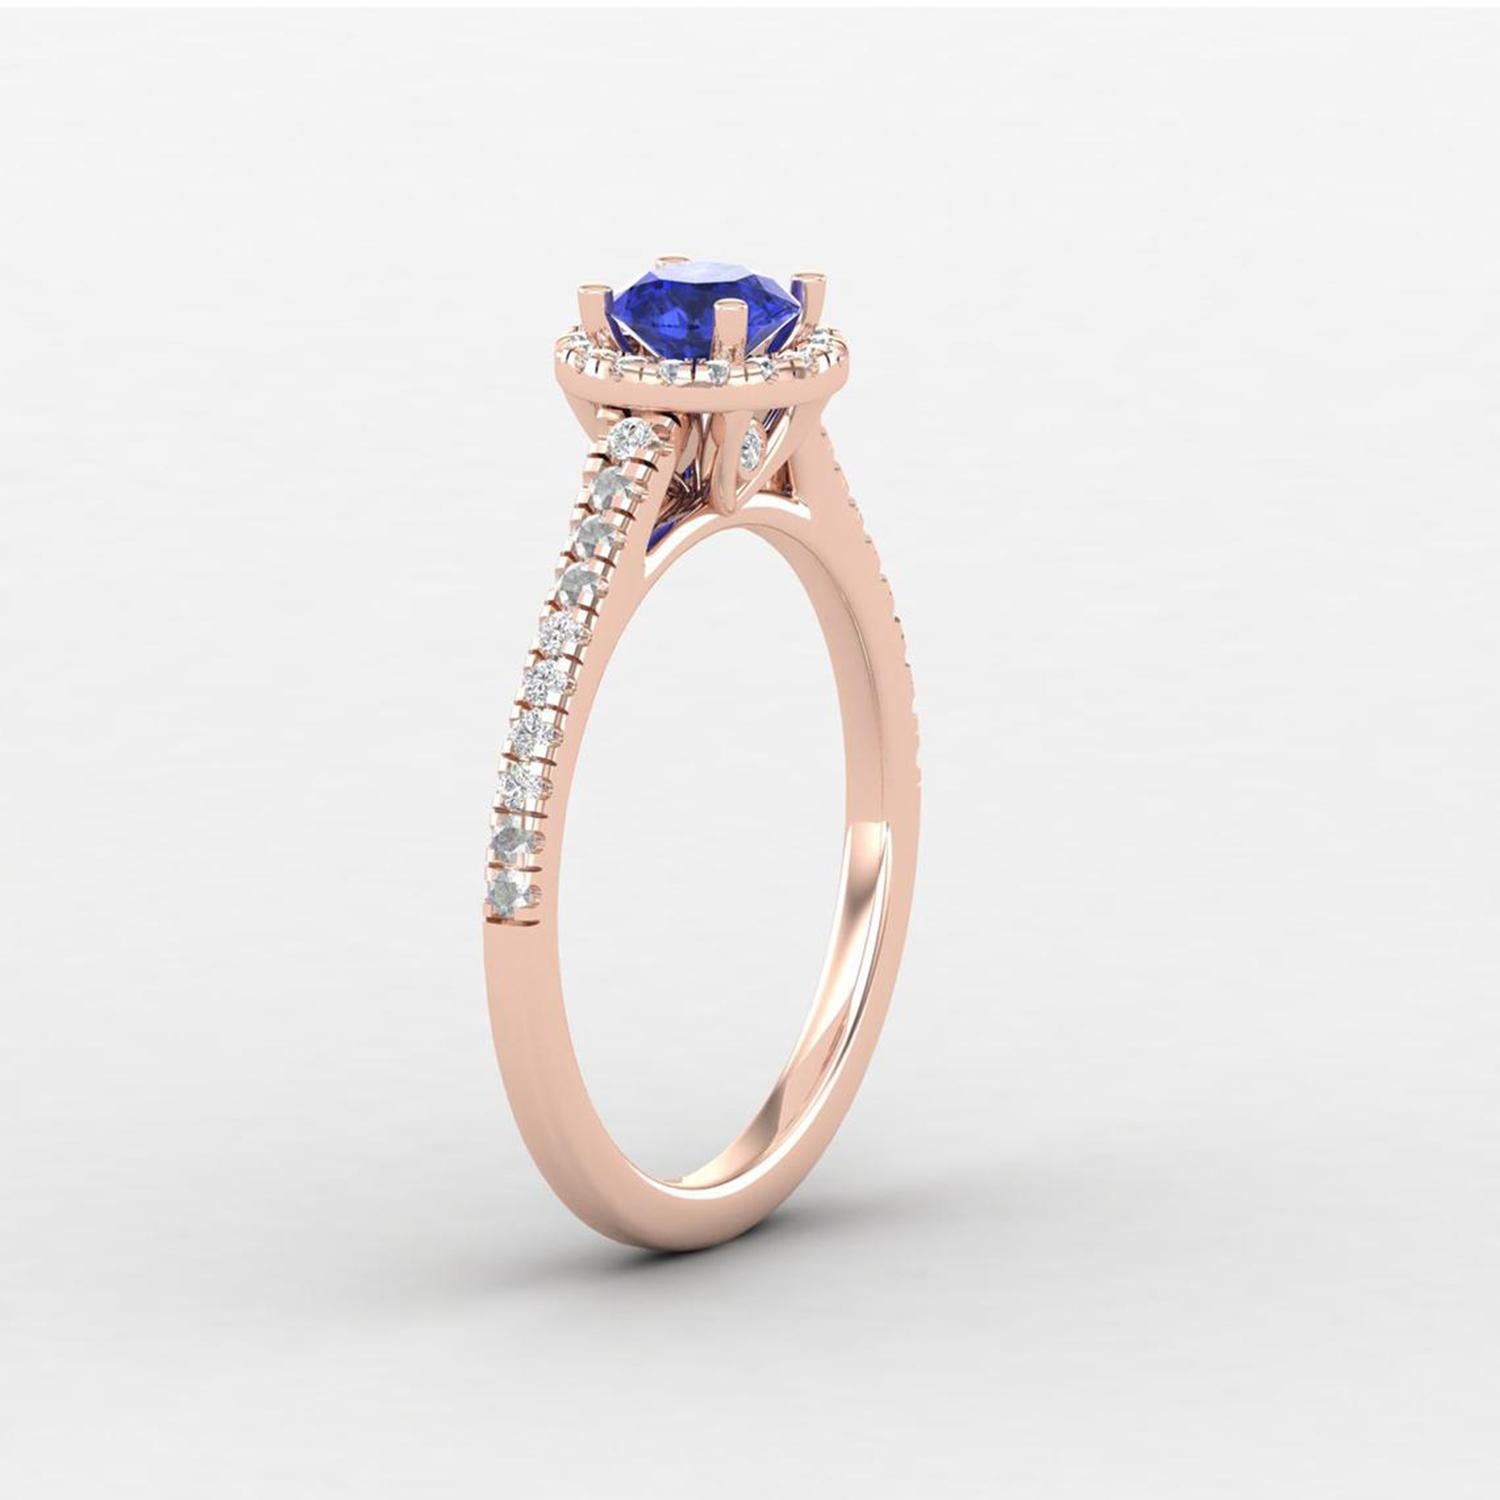 14 Karat Gold 5 MM Tanzanite Ring / 1.2 MM Round Diamond Ring / Solitaire Ring In New Condition For Sale In Jaipur, RJ